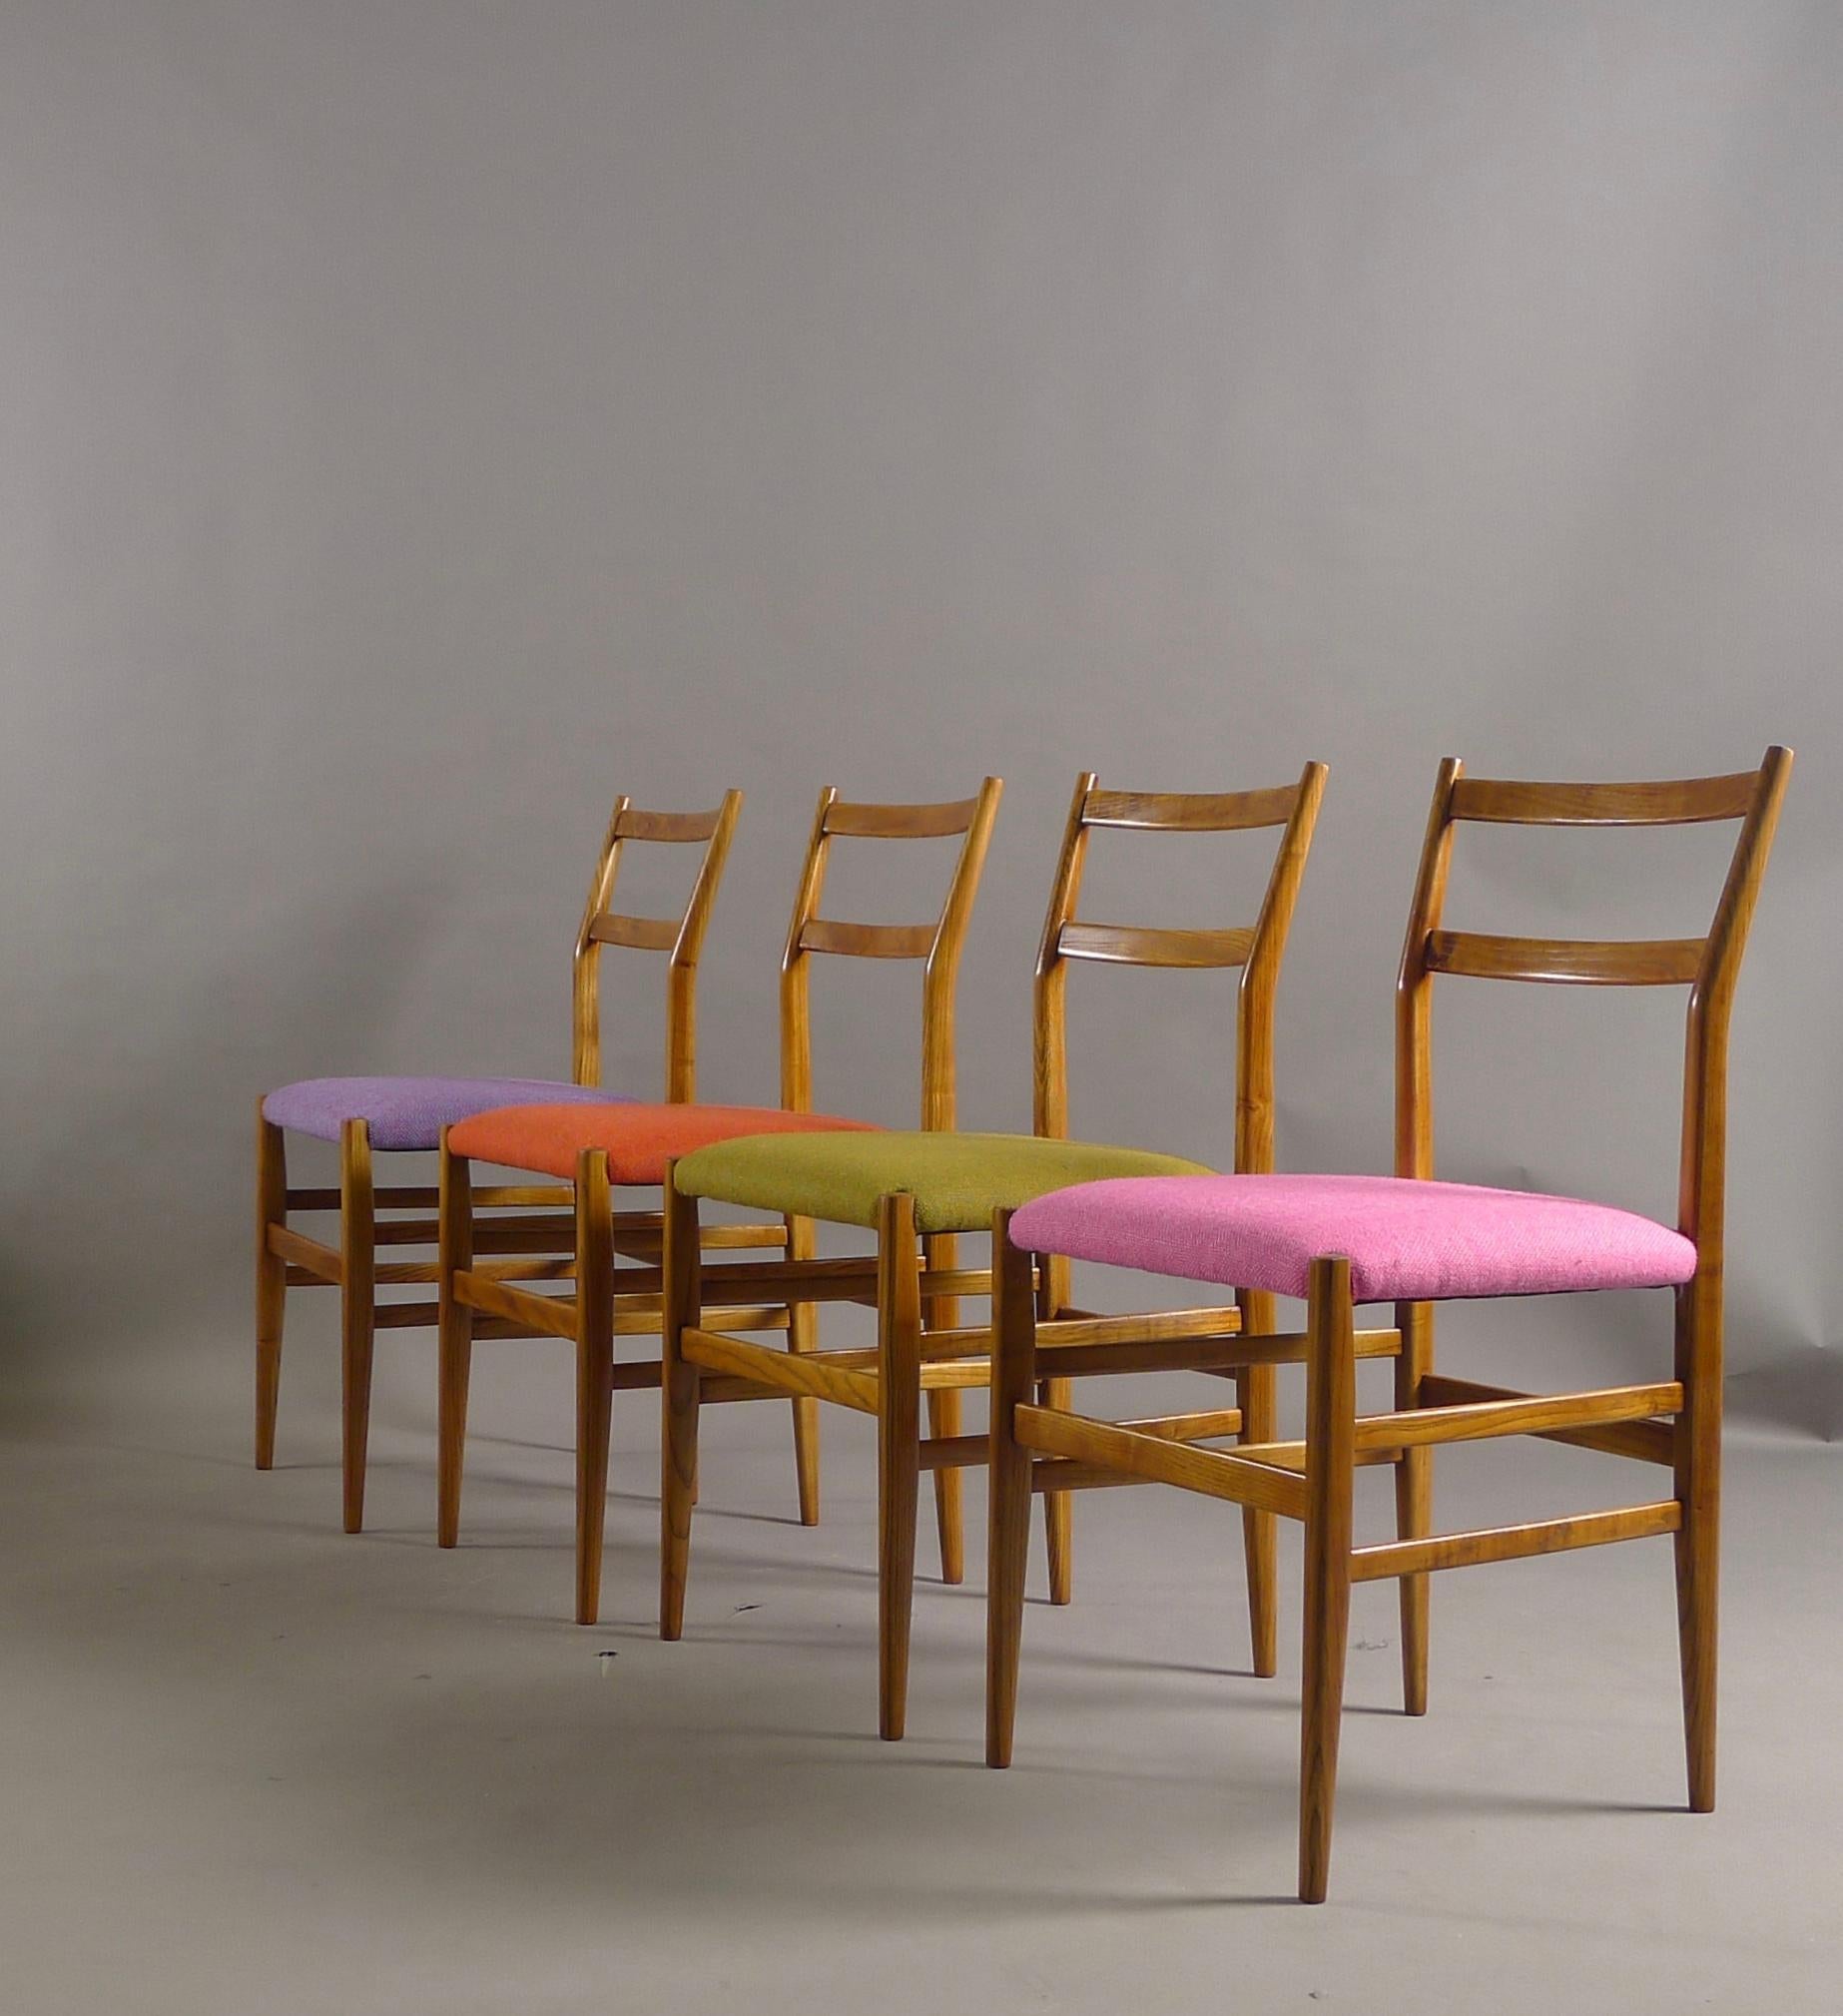 Gio Ponti, for Cassina, Italy. A harlequin set of 4 